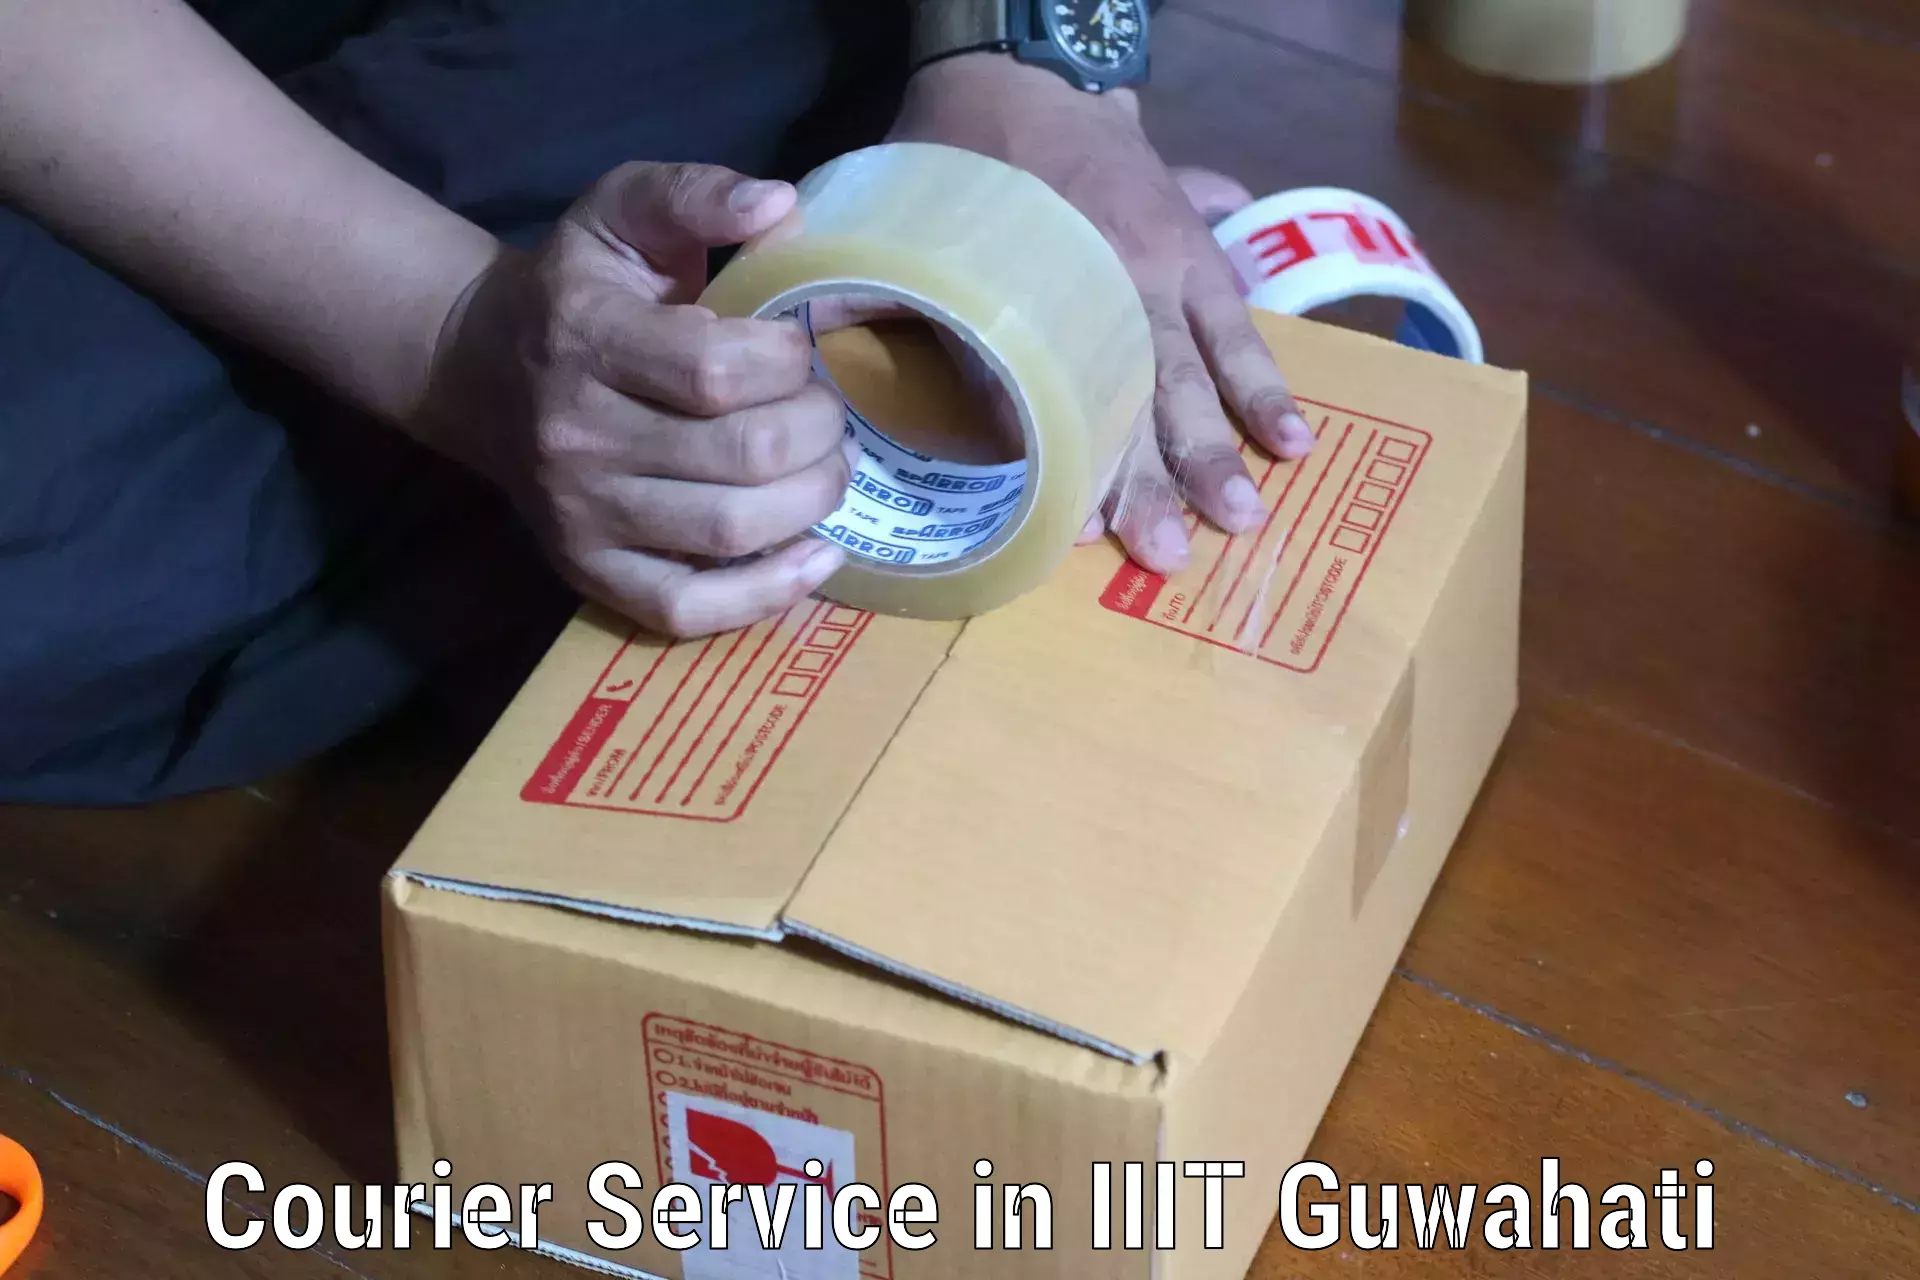 Comprehensive shipping services in IIIT Guwahati